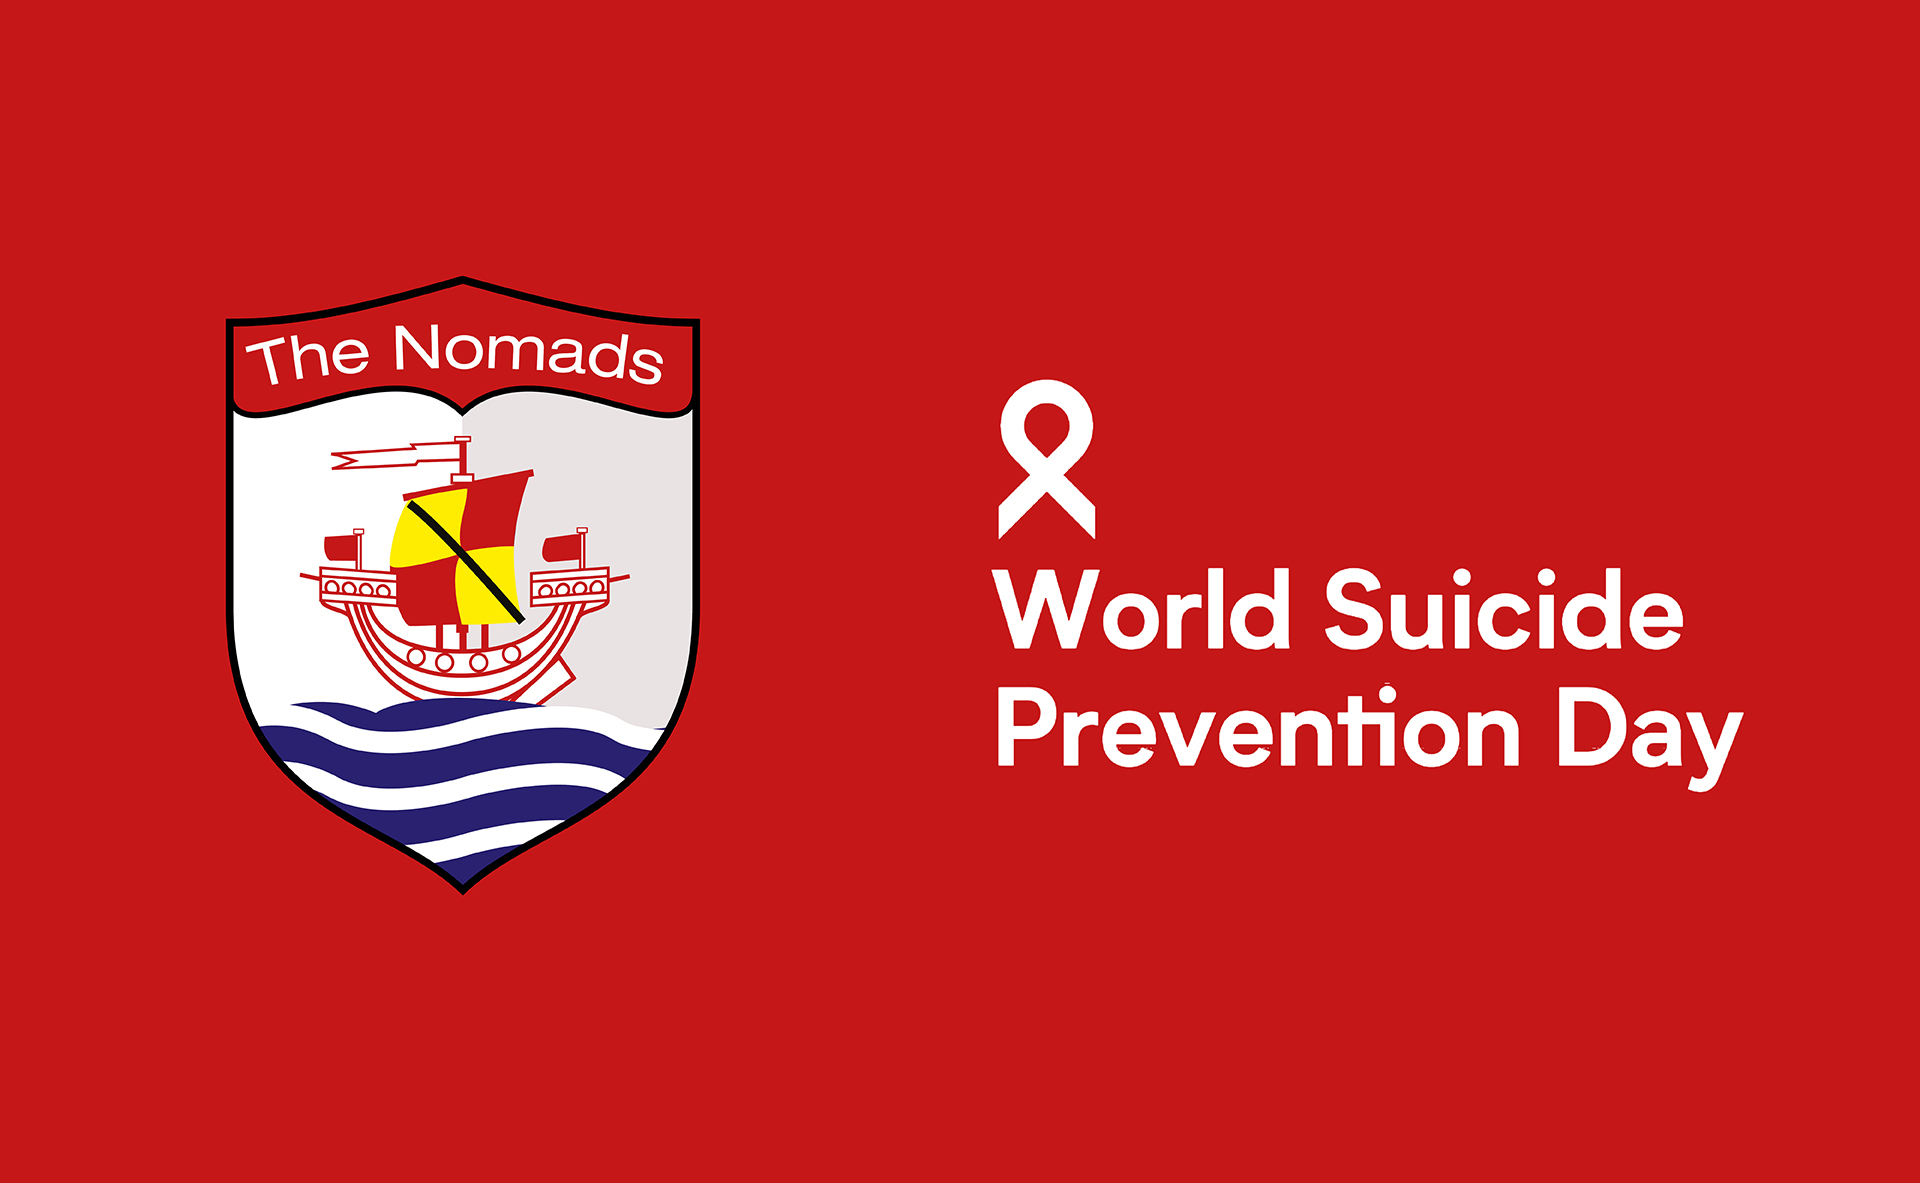 Watch our video to promote awareness of World Suicide Prevention Day